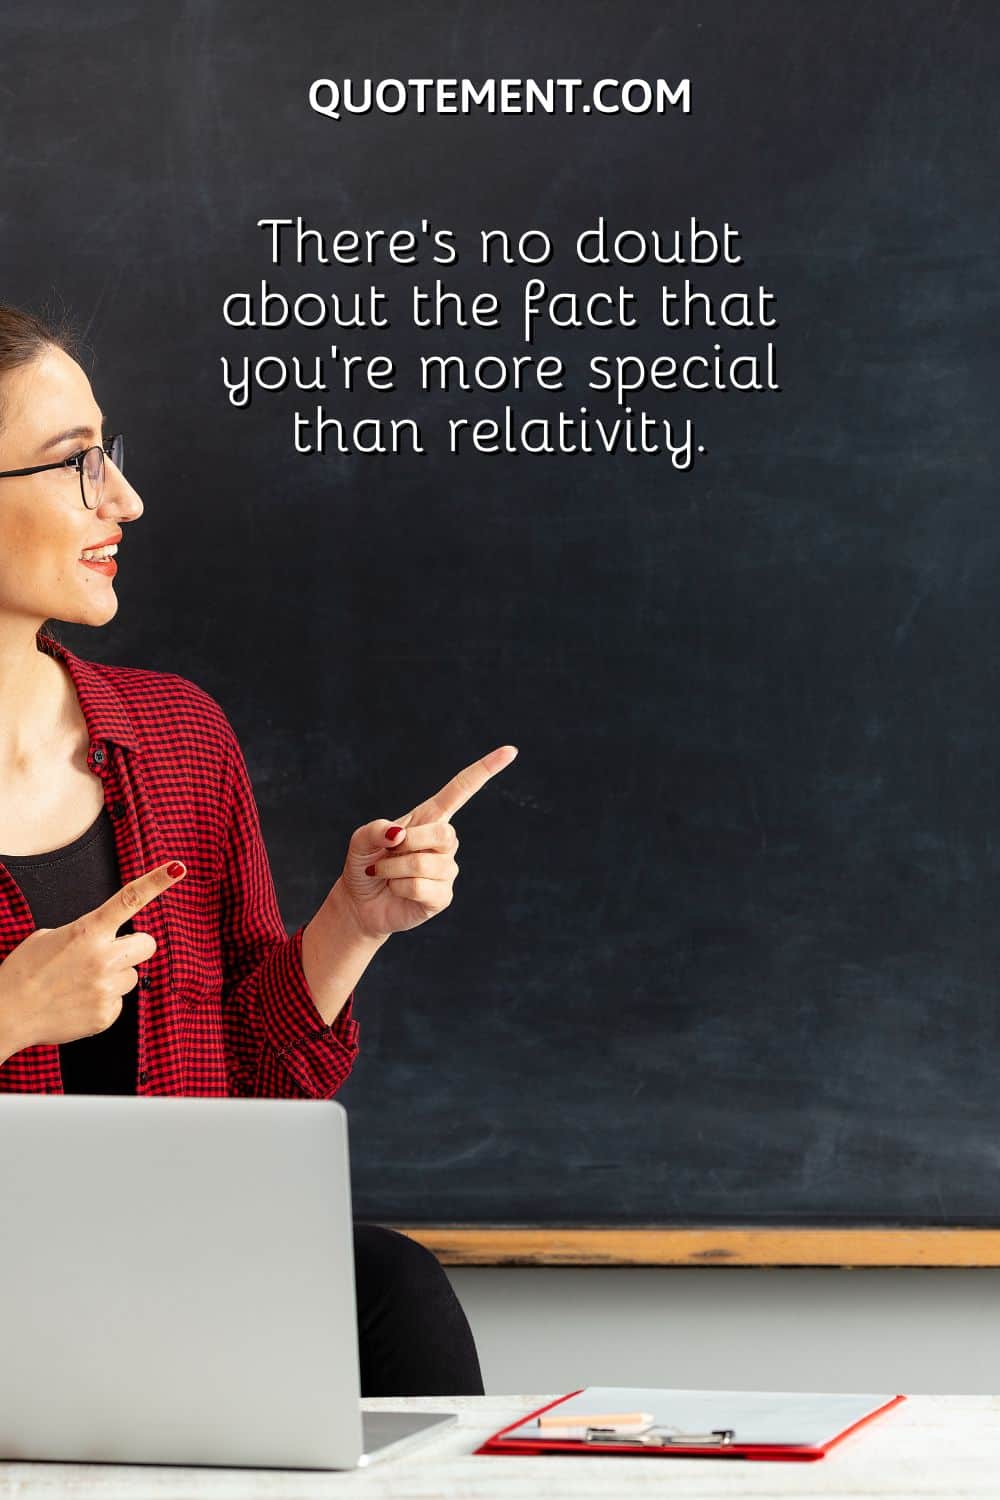 There’s no doubt about the fact that you’re more special than relativity